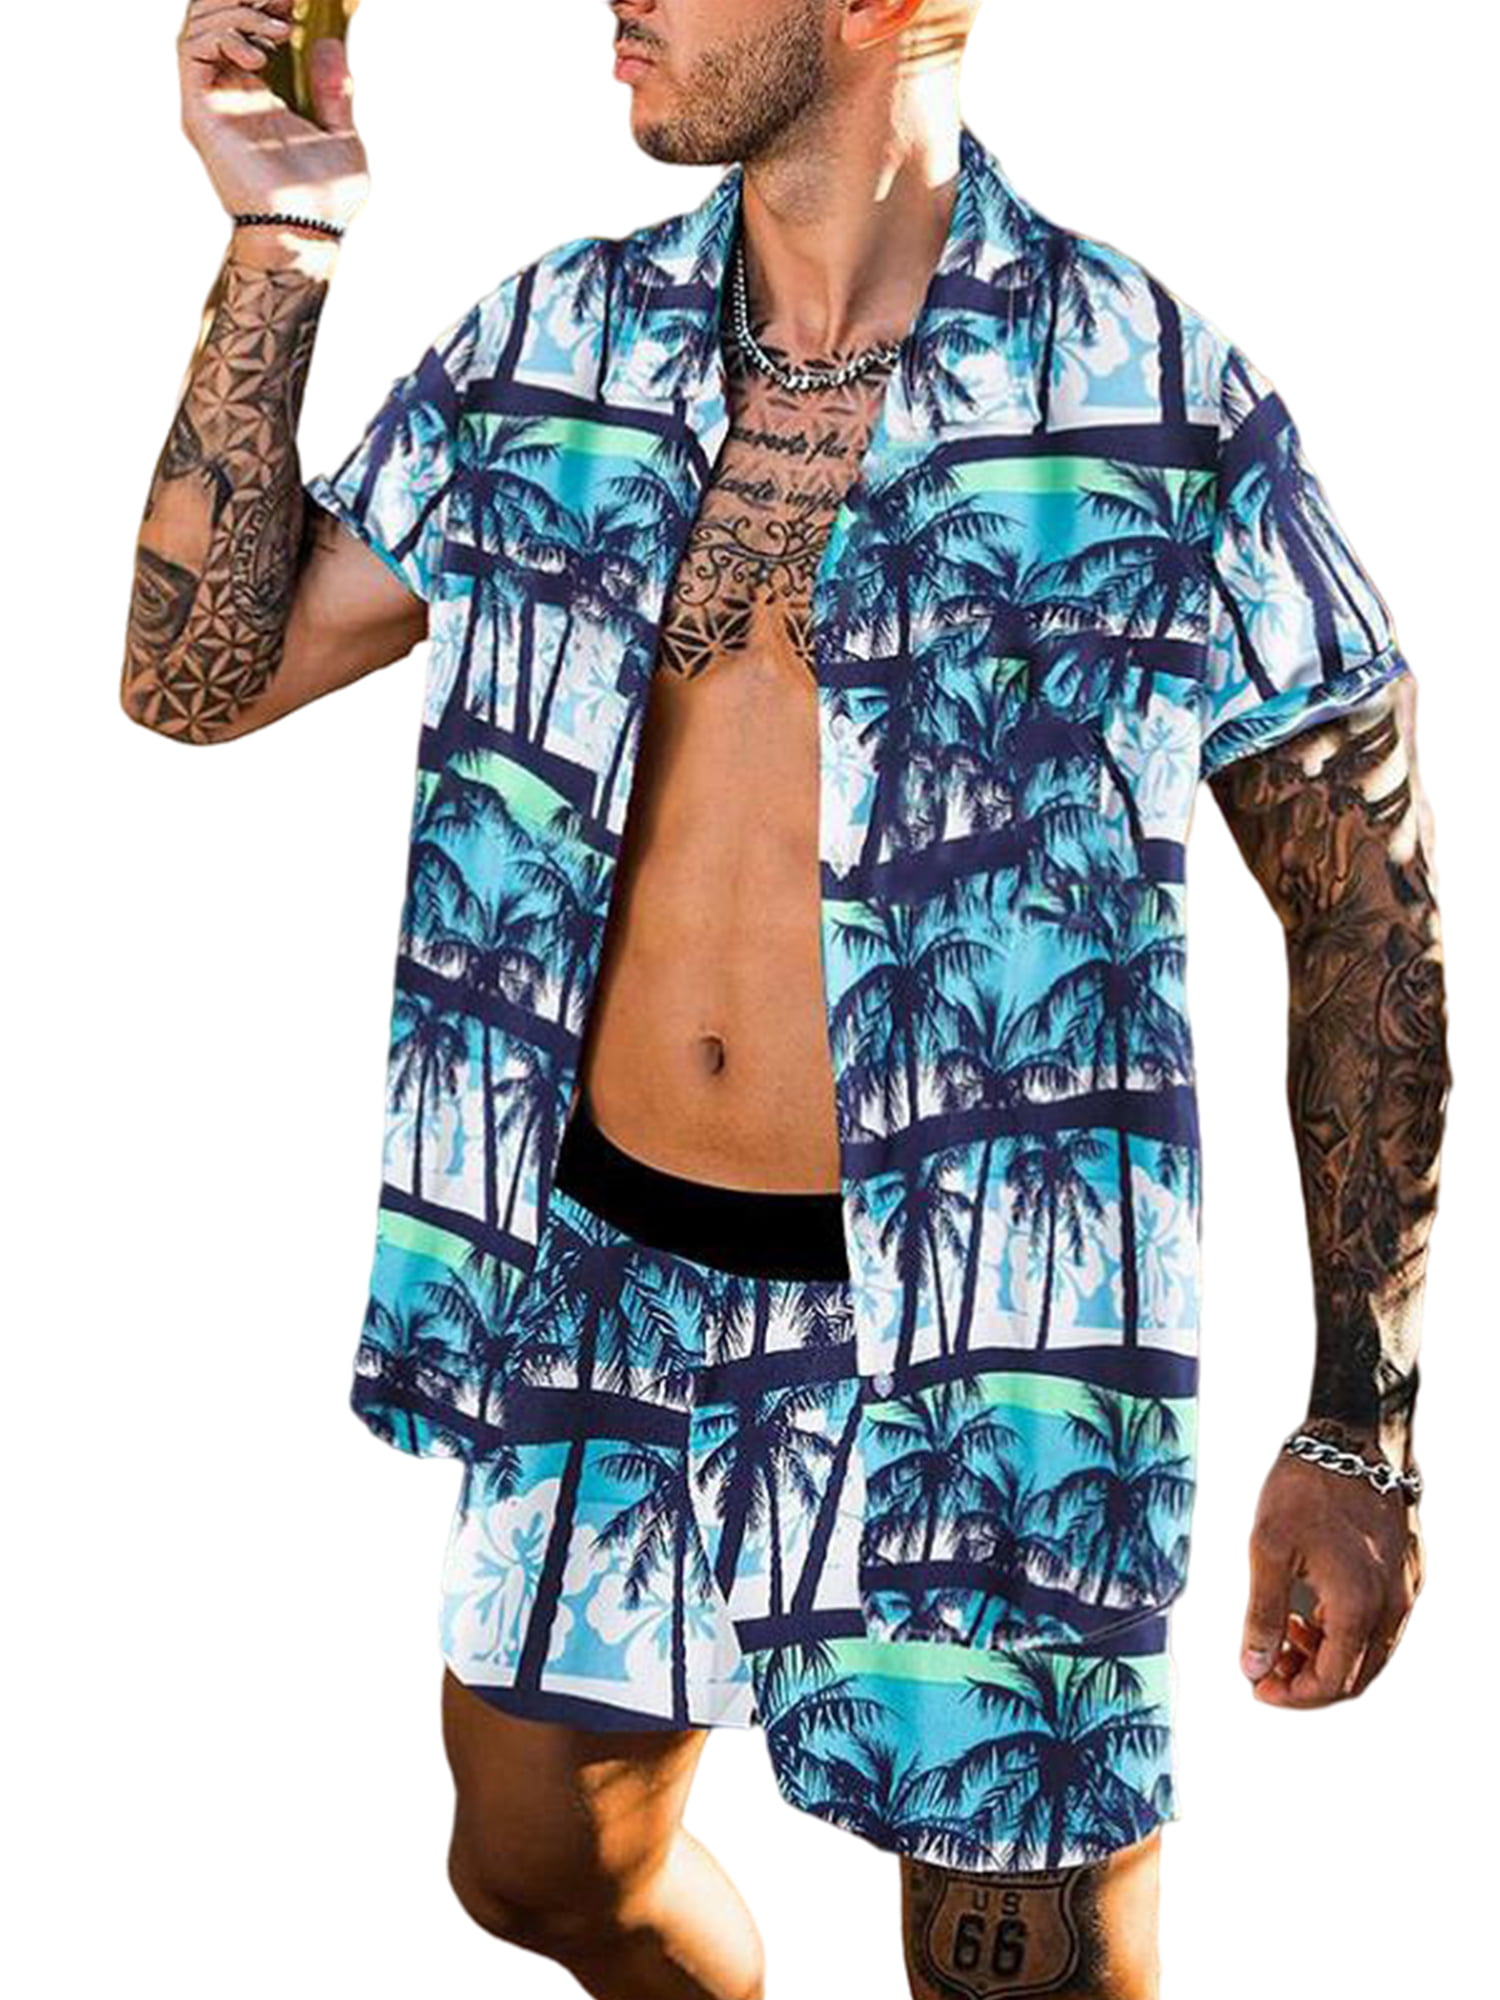 2 Piece Outfit Hawaiian Shorts Sets for Mens Summer Stylish Casual Graphic Tees Tank Tops Beach Shirts Suit Pockets 